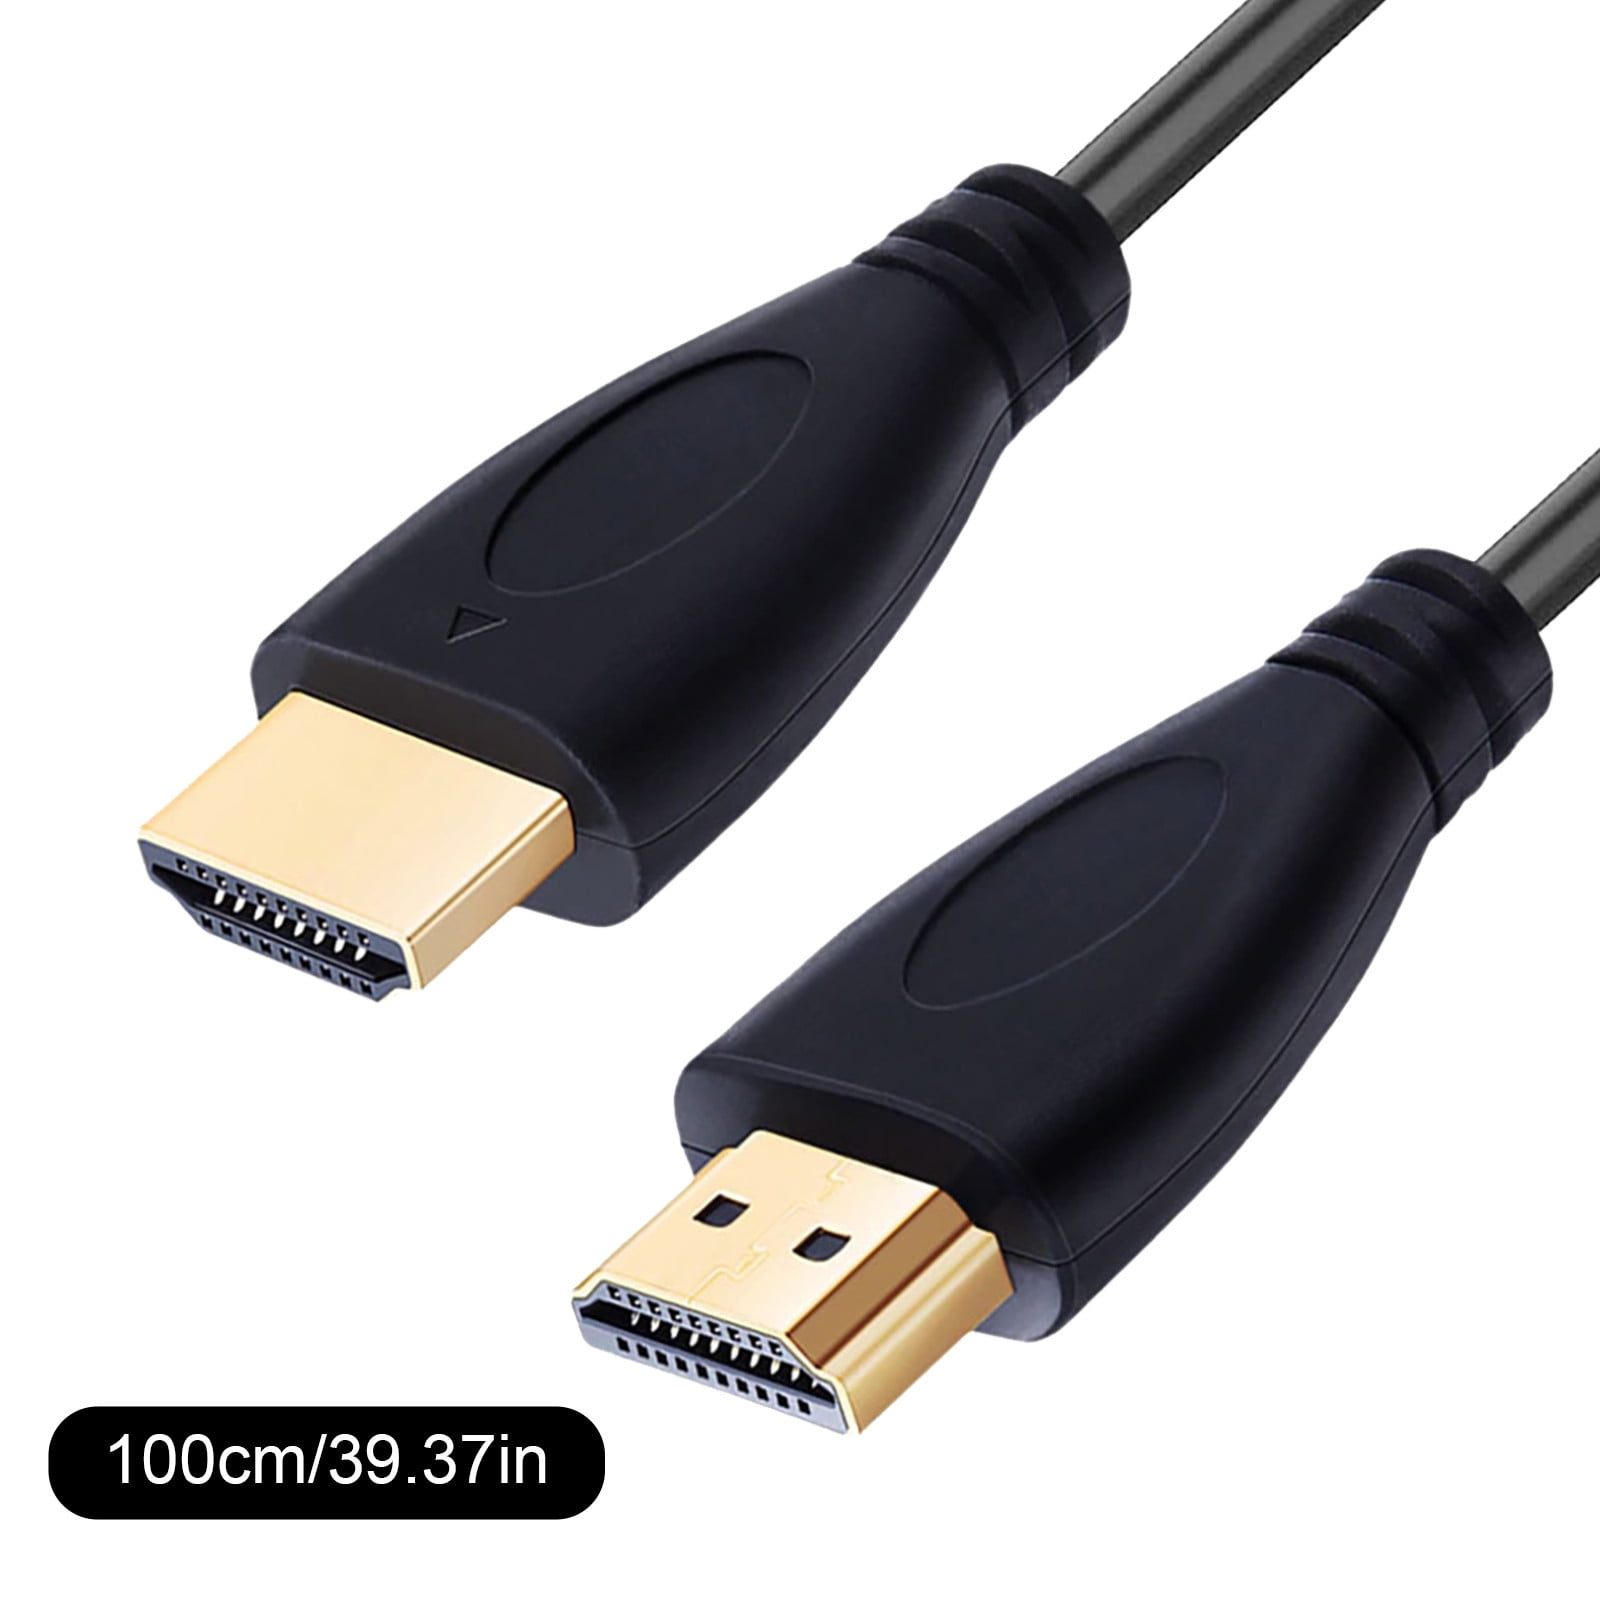 6 Feet,Black HDMI 2.0 / 4K Compatible Supports  Fire TV and other HDMI-Enabled Devices Belkin AV10090bt06 High-Speed HDMI Cable 